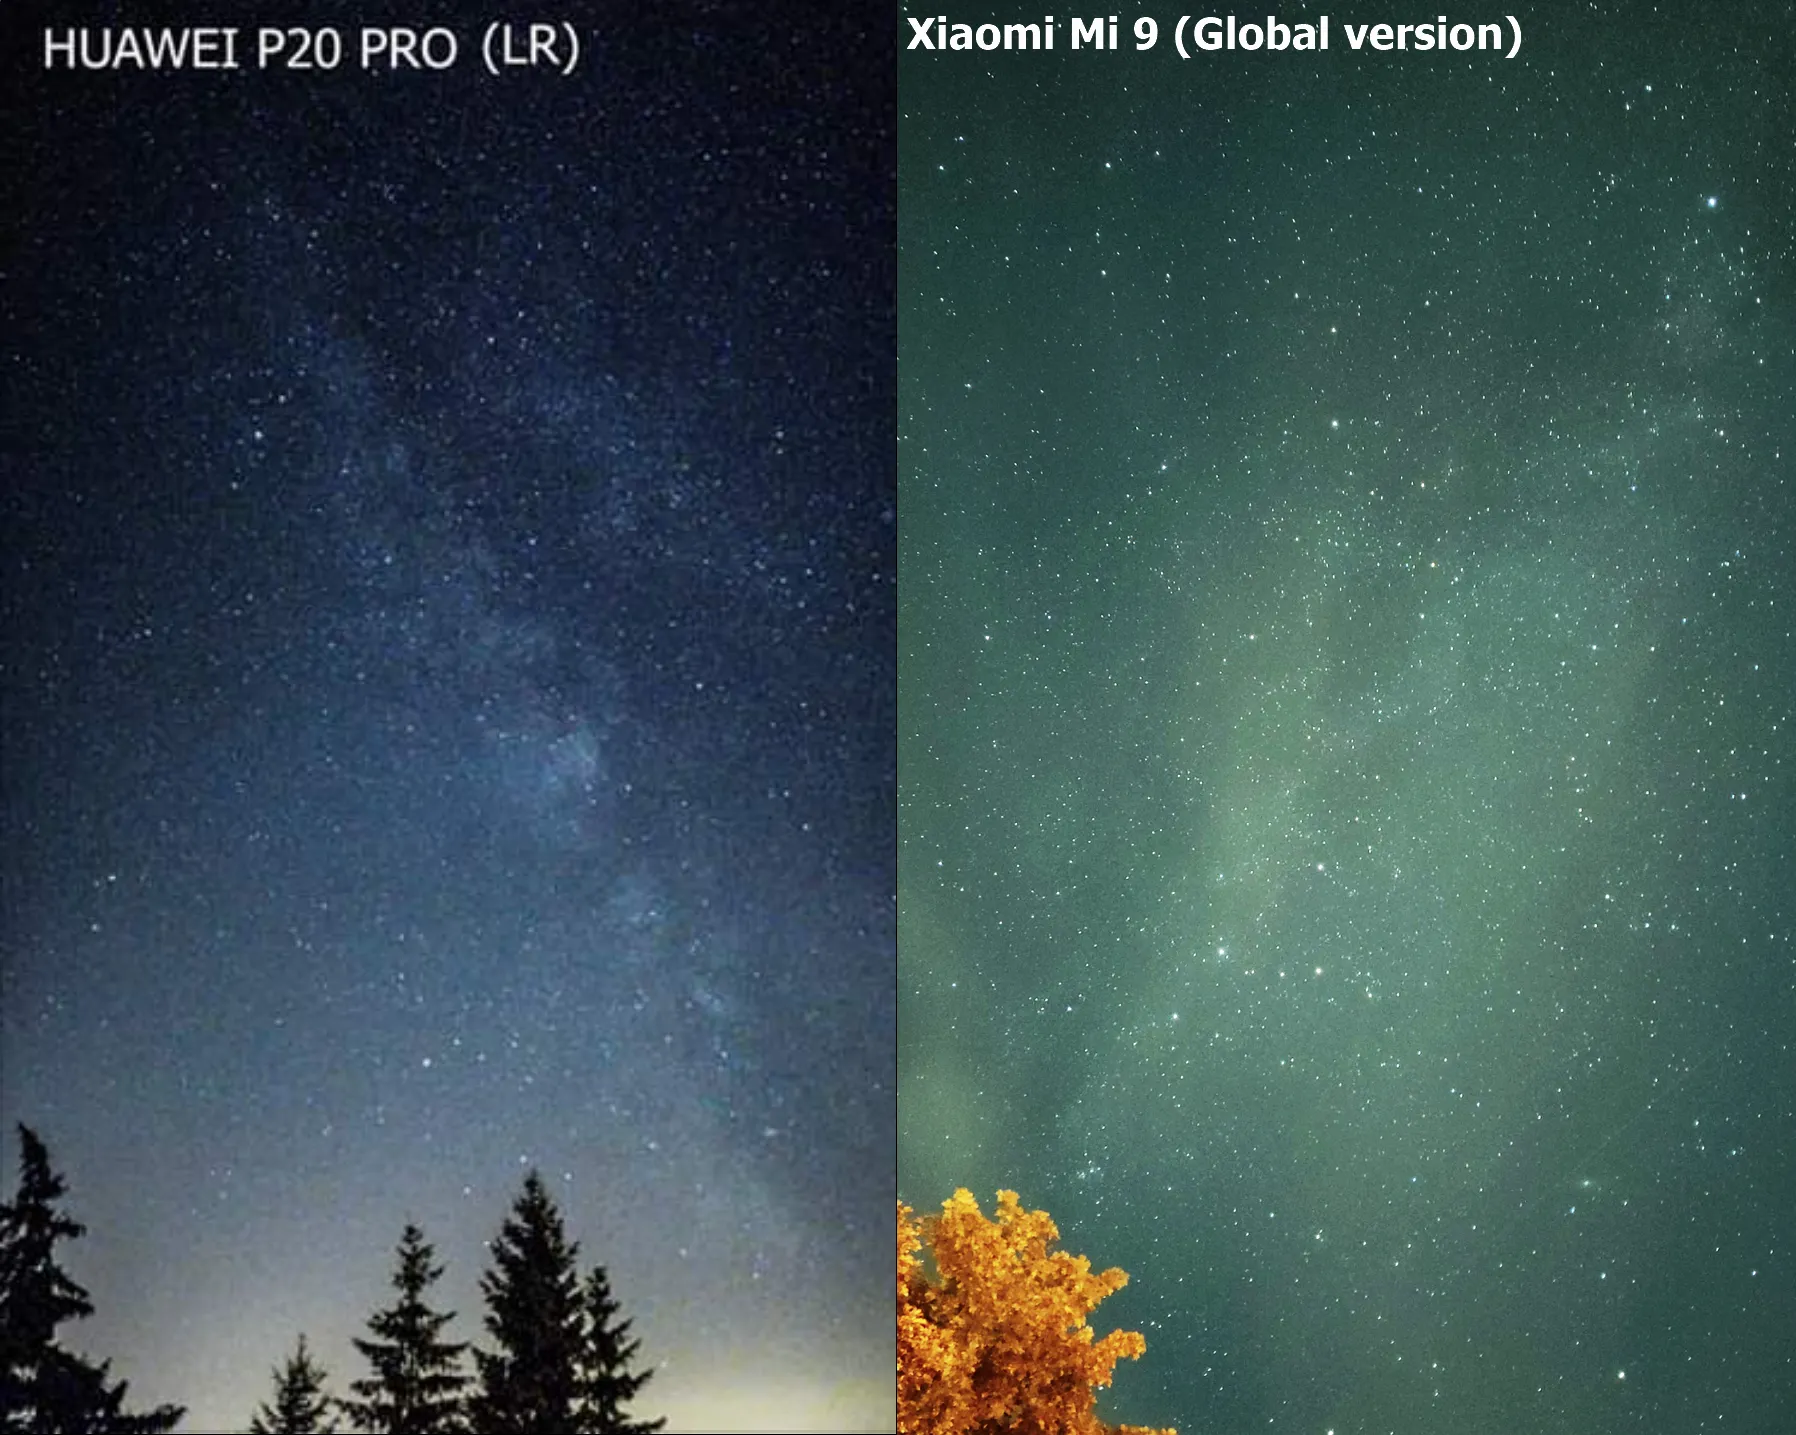 Huawei P20 Pro vs Xiaomi Mi 9 night picture after processing